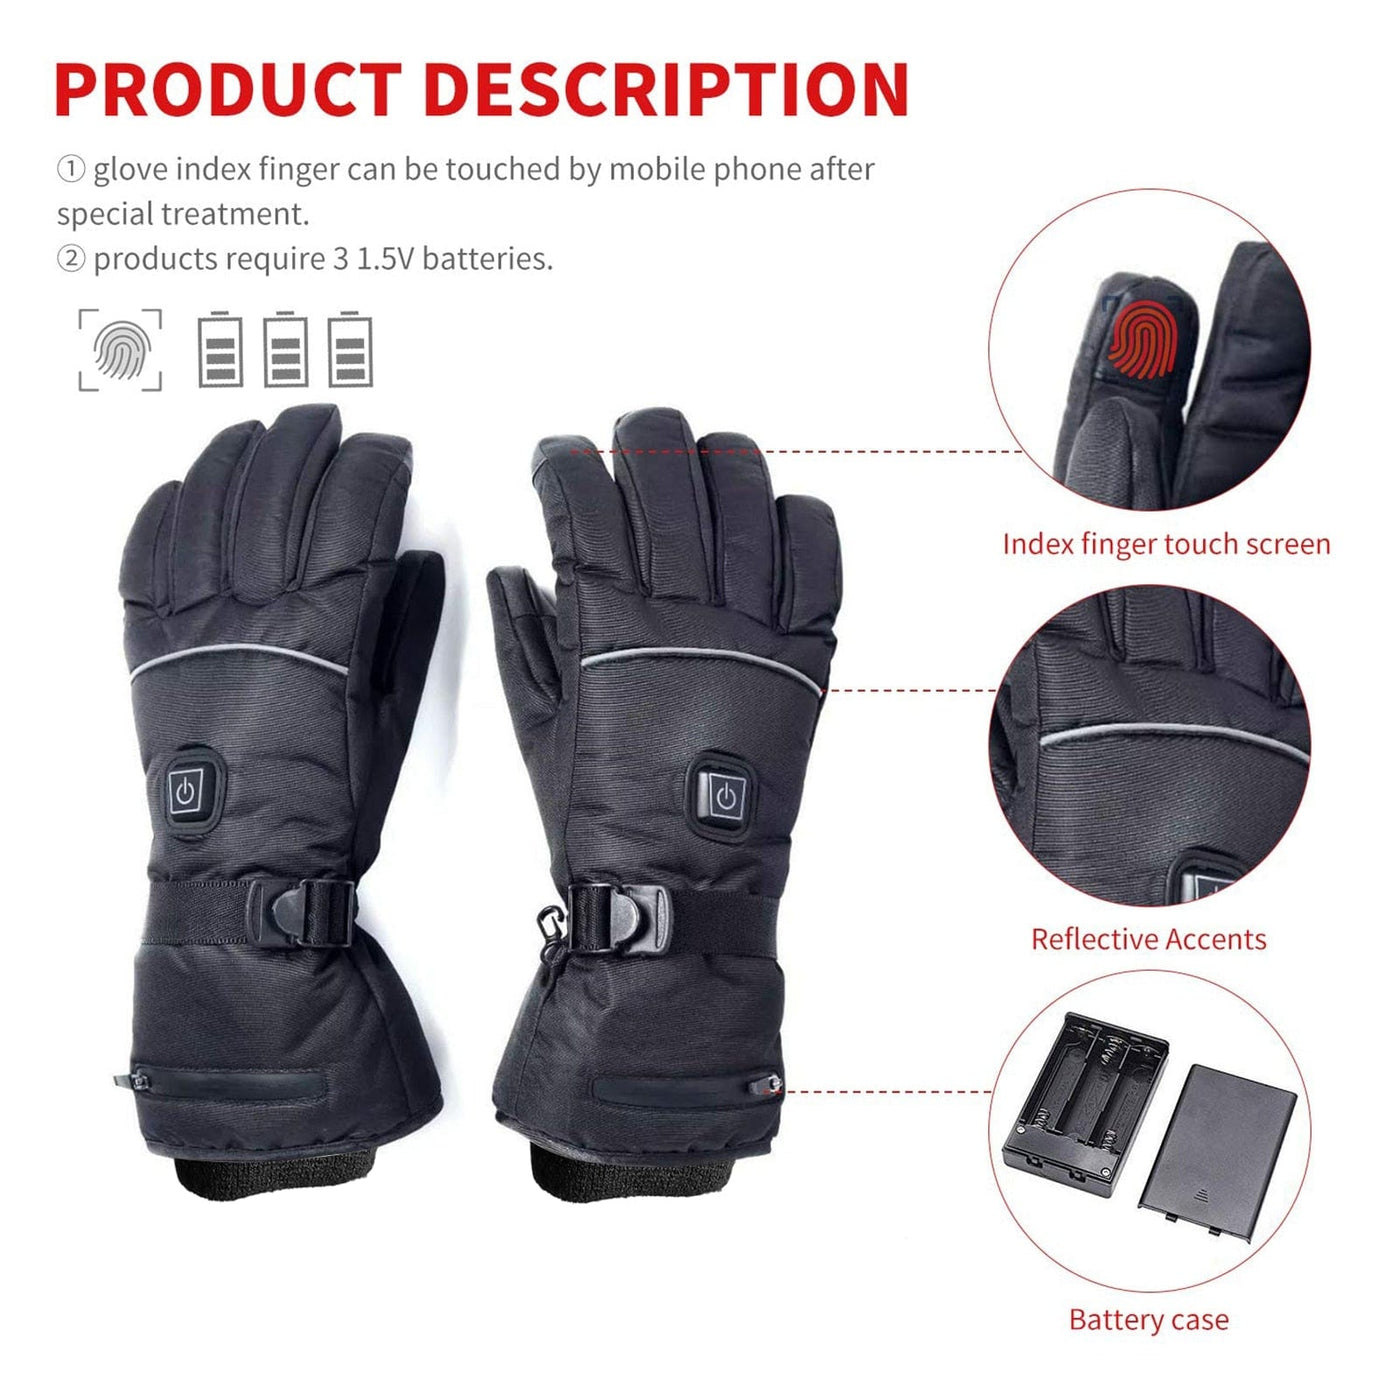 Winter Ski Outdoor Work USB Electric Heated Gloves Hand Warmer With 4000mAh Rechargeable Battery Cycling Motorcycle Gloves